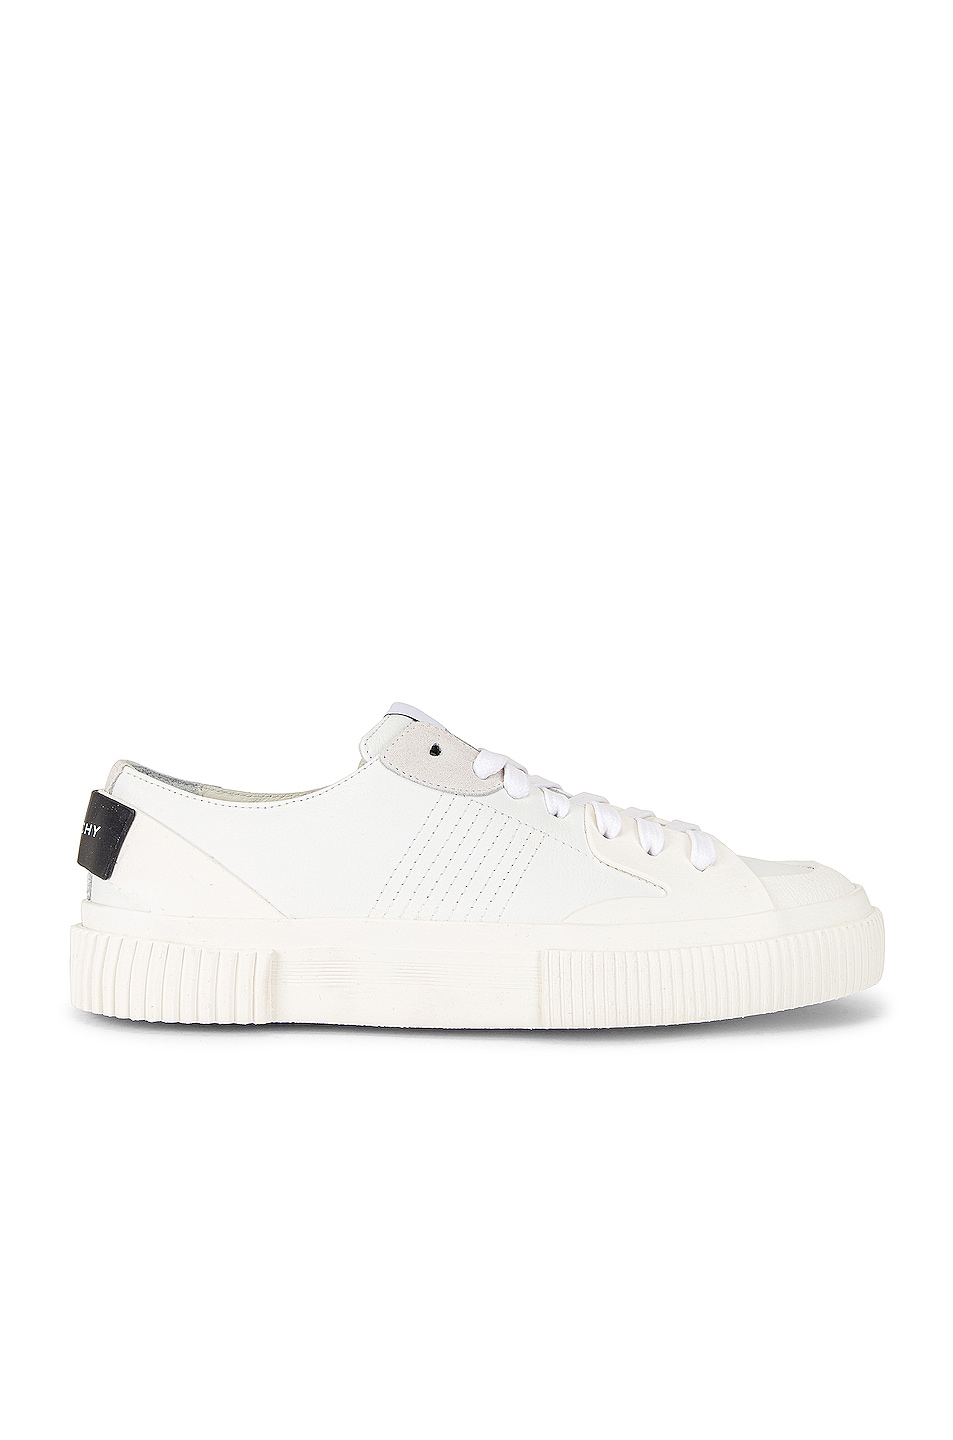 Givenchy Tennis Light Low Sneakers in White | FWRD